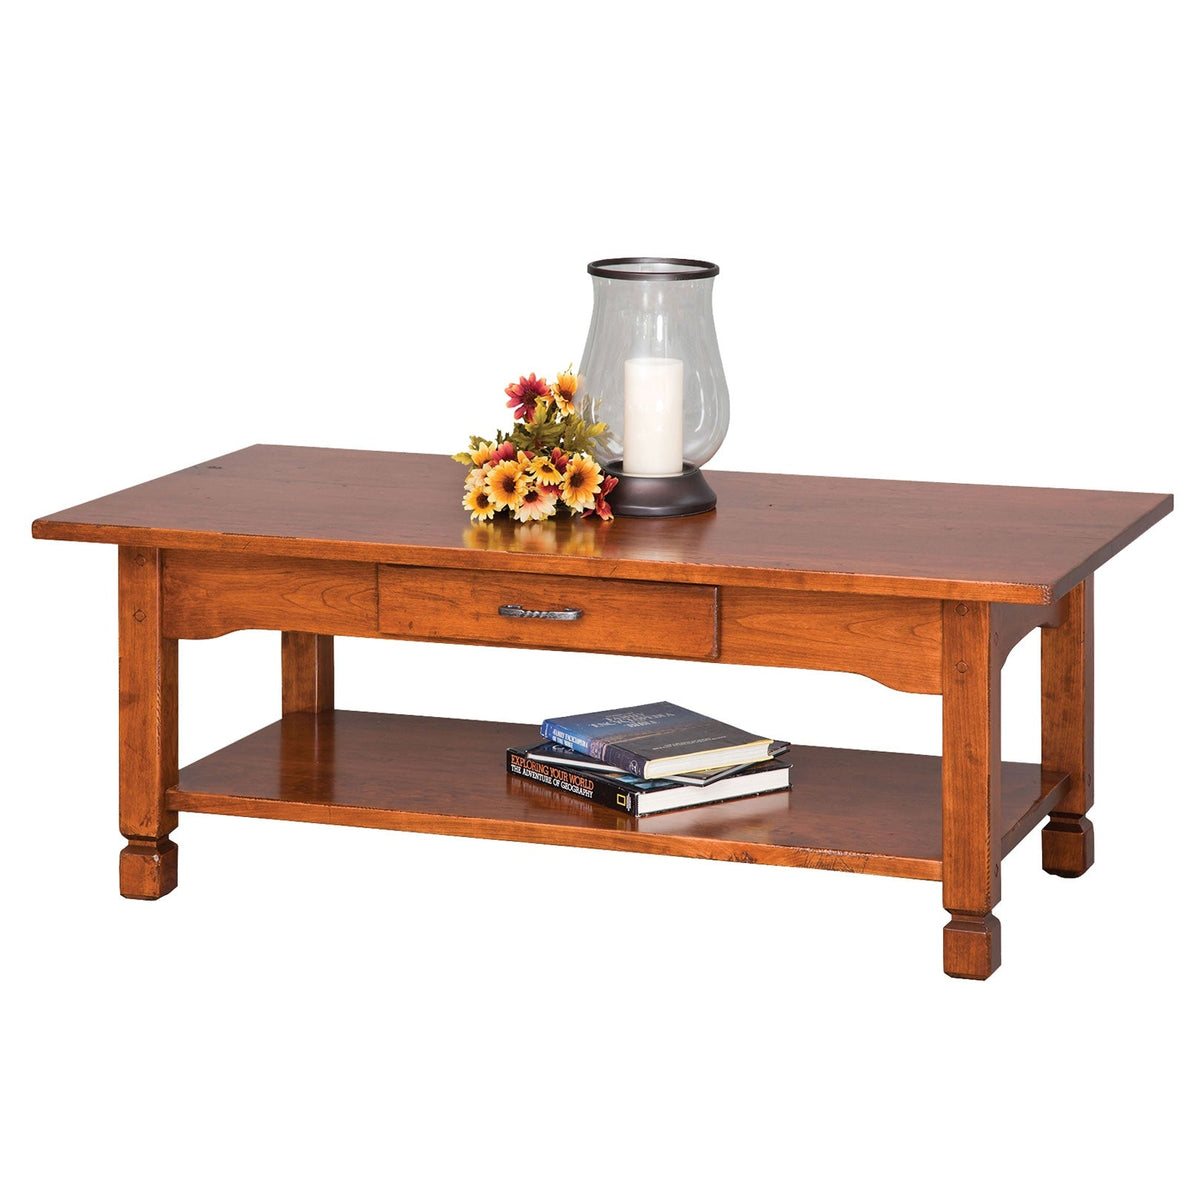 Rustic Country Coffee Table - snyders.furniture